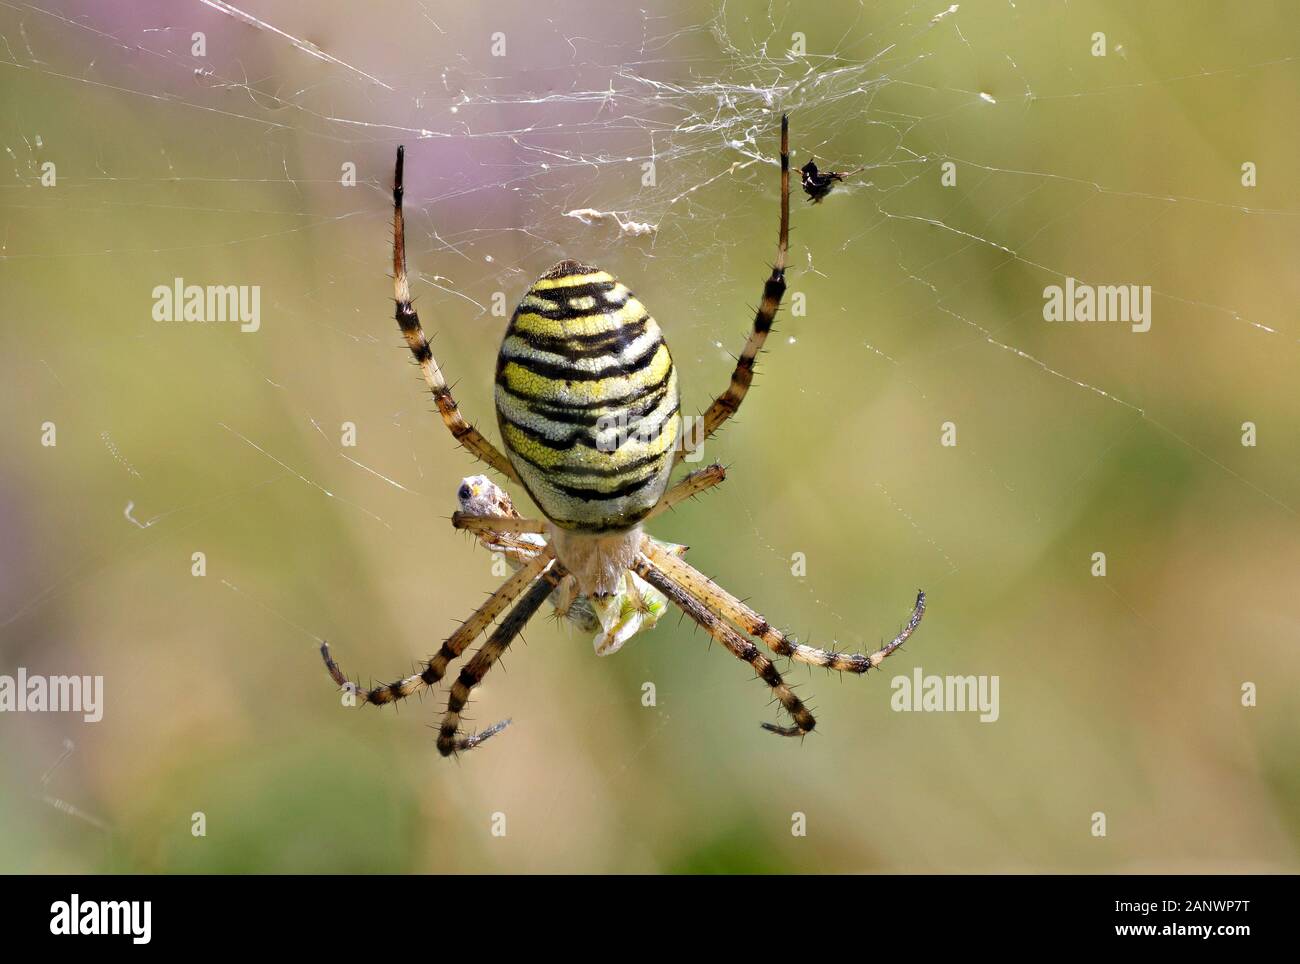 Argiope High Resolution Stock Photography and Images - Alamy